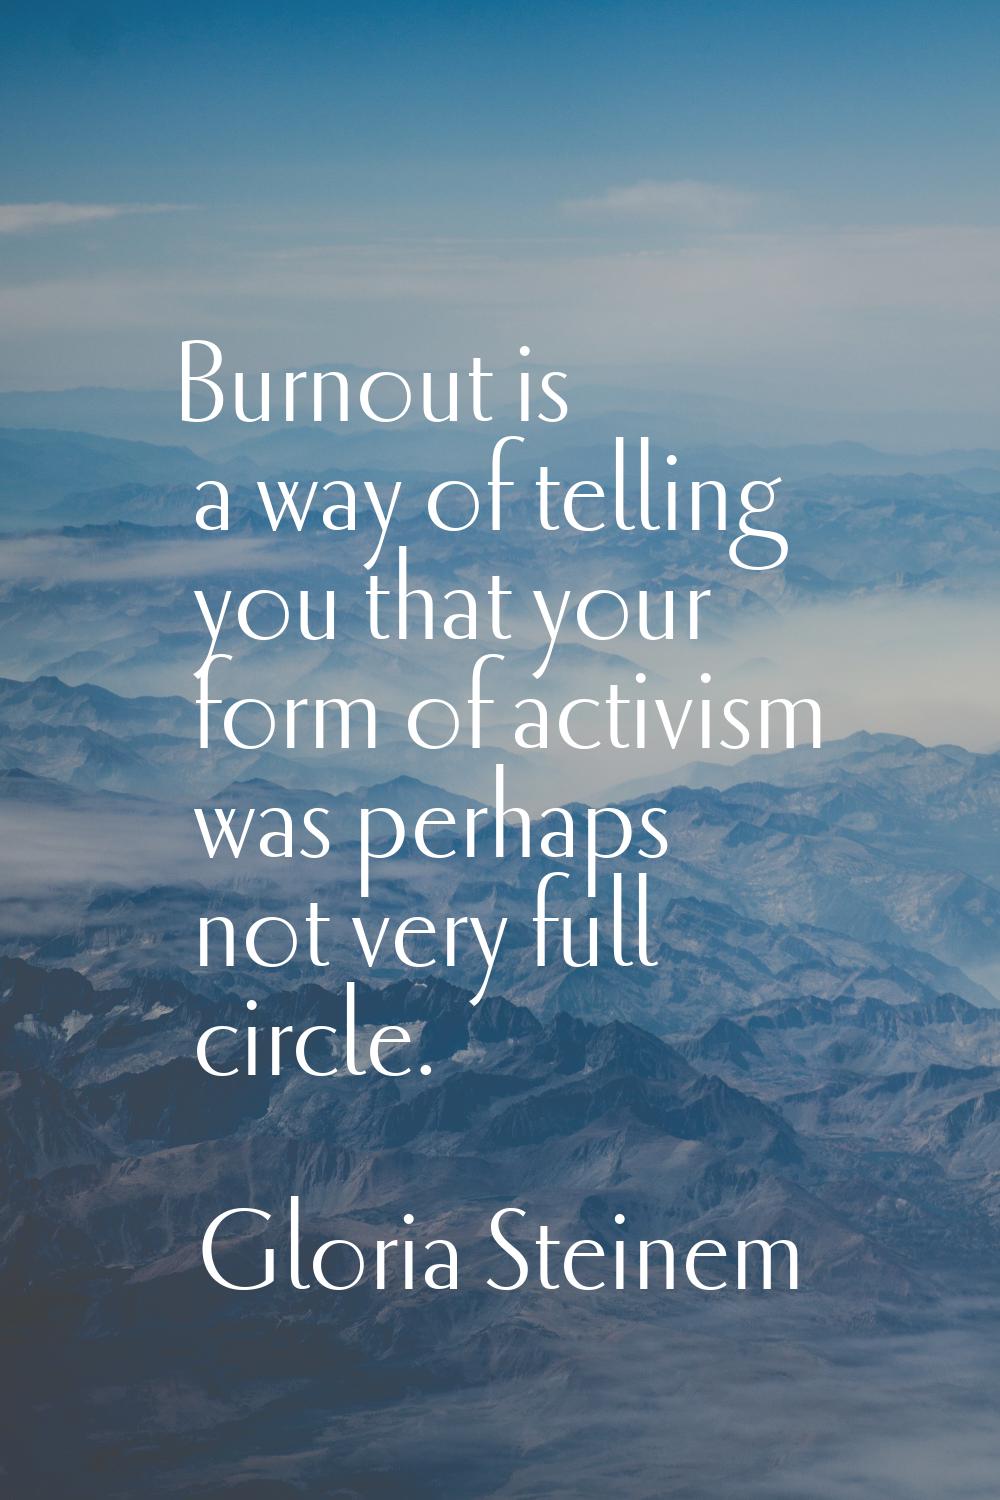 Burnout is a way of telling you that your form of activism was perhaps not very full circle.